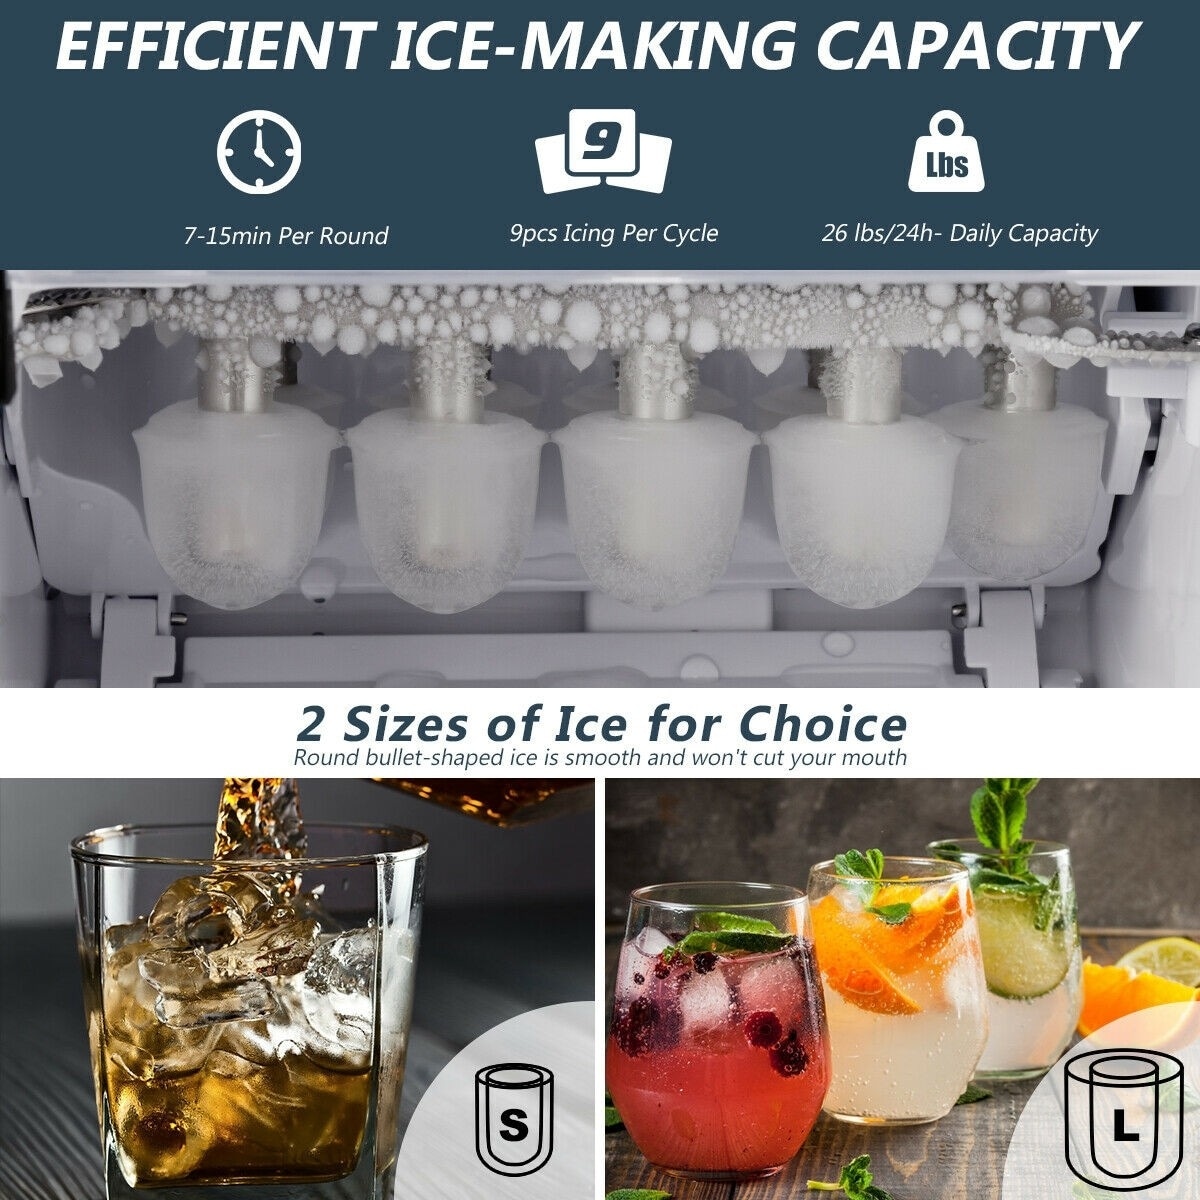 Stainless Steel 26 lbs/24 H Self-Clean Countertop Ice Maker Machine - 12 x  9 x 13 (L x W x H) - Bed Bath & Beyond - 32819978